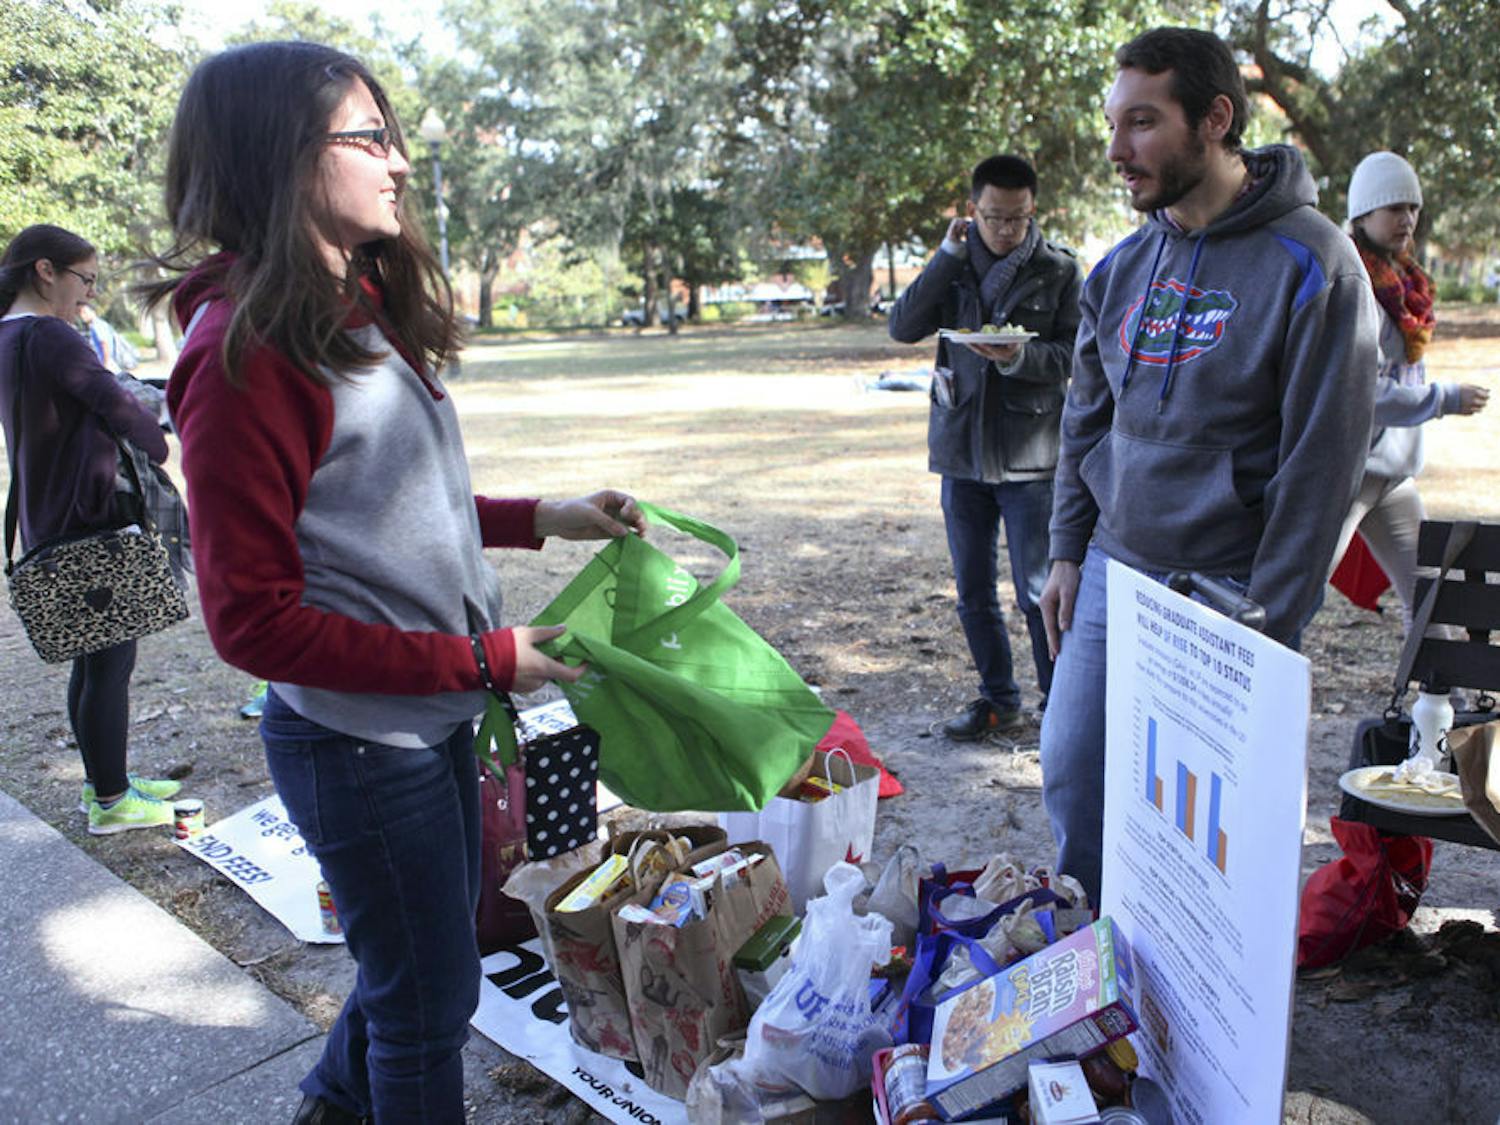 UF English sophomore Petrana Radulovic, 18, donated food to Thanksgiving, which goes to graduate assistants, on Thursday while talking to UF history graduate student Kyle Bridge, 24.&nbsp;